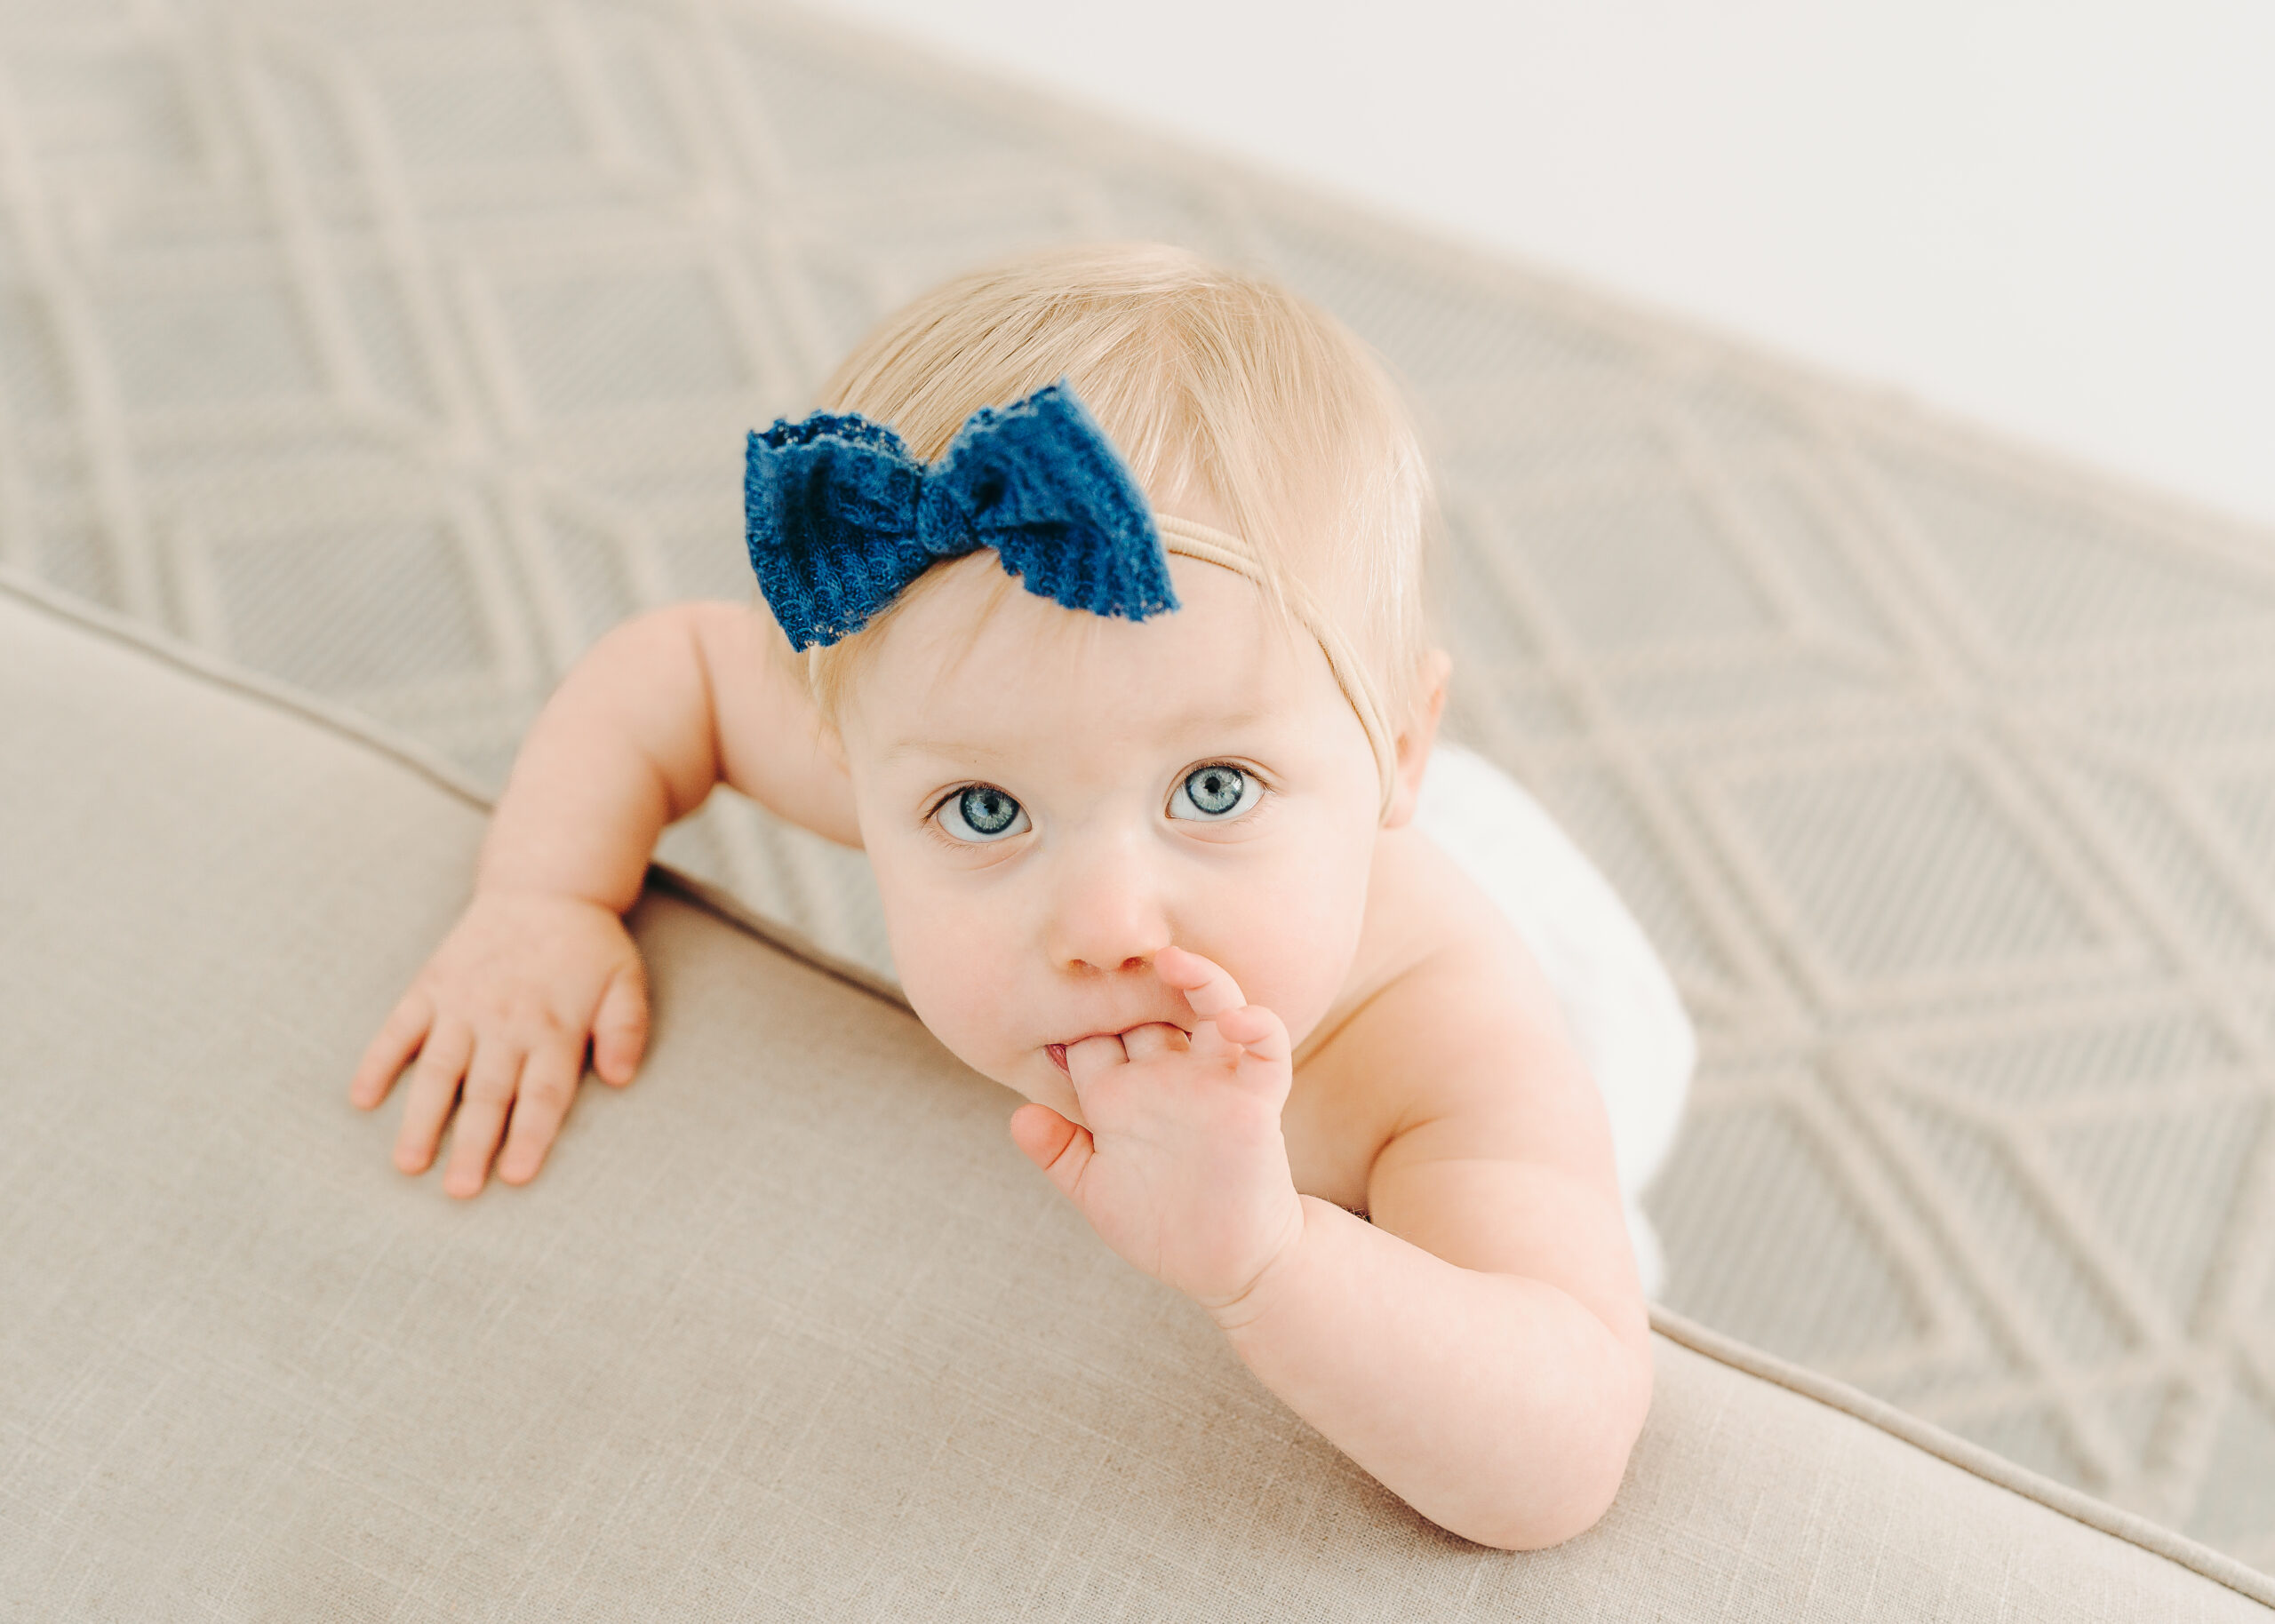 A baby girl looks up inquisitively at the camera wearing a blue bow.